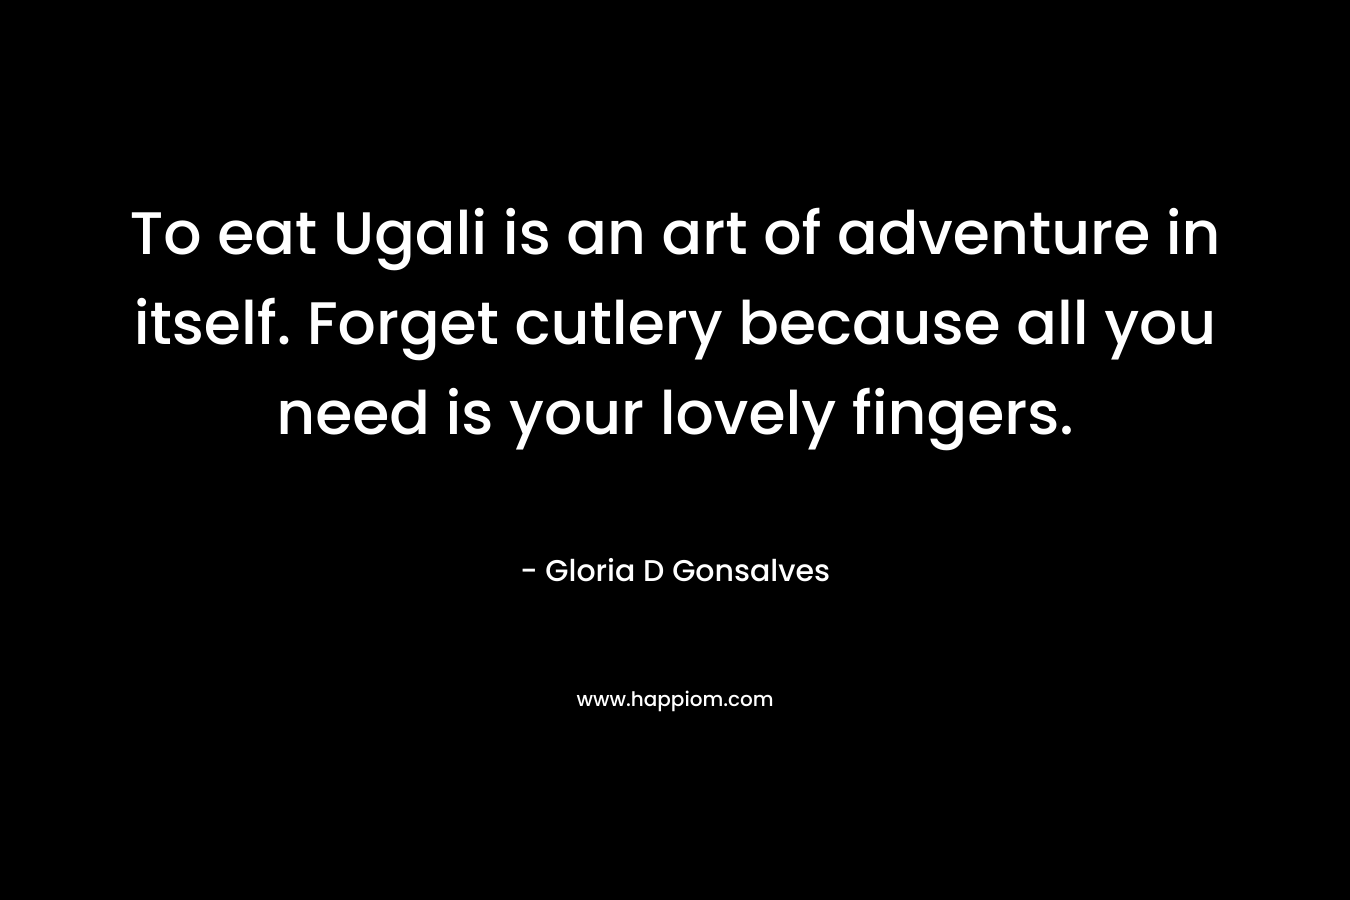 To eat Ugali is an art of adventure in itself. Forget cutlery because all you need is your lovely fingers. – Gloria D Gonsalves